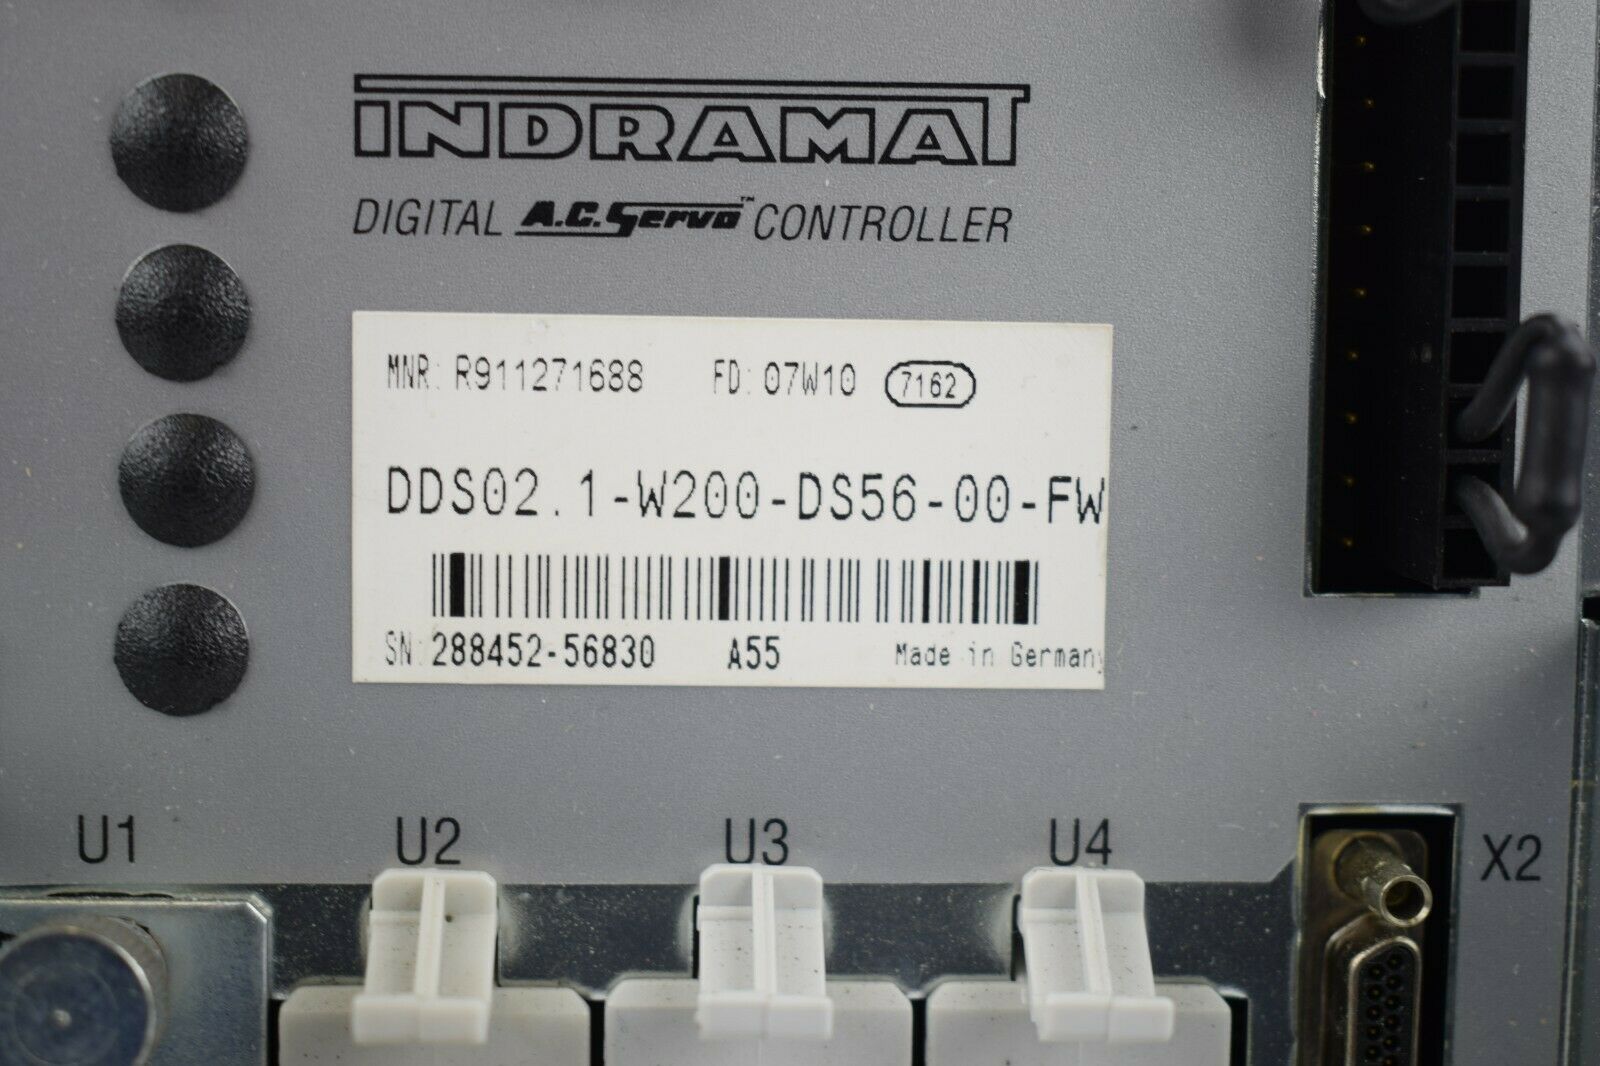 Indramat DDS02.1-W200-DS56-00-FW